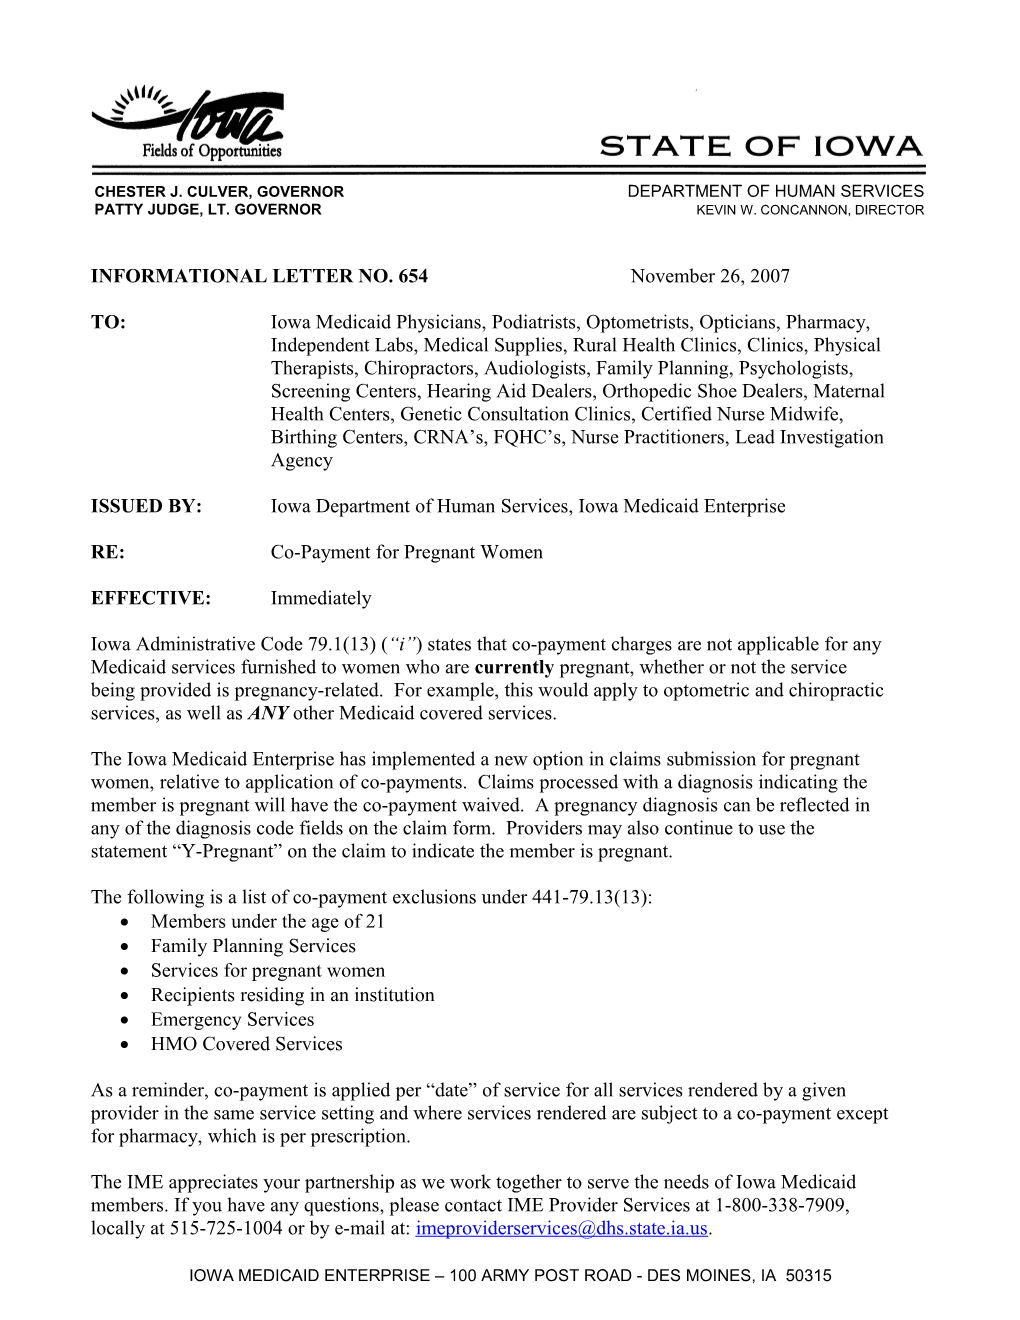 Department of Human Services Letterhead s5